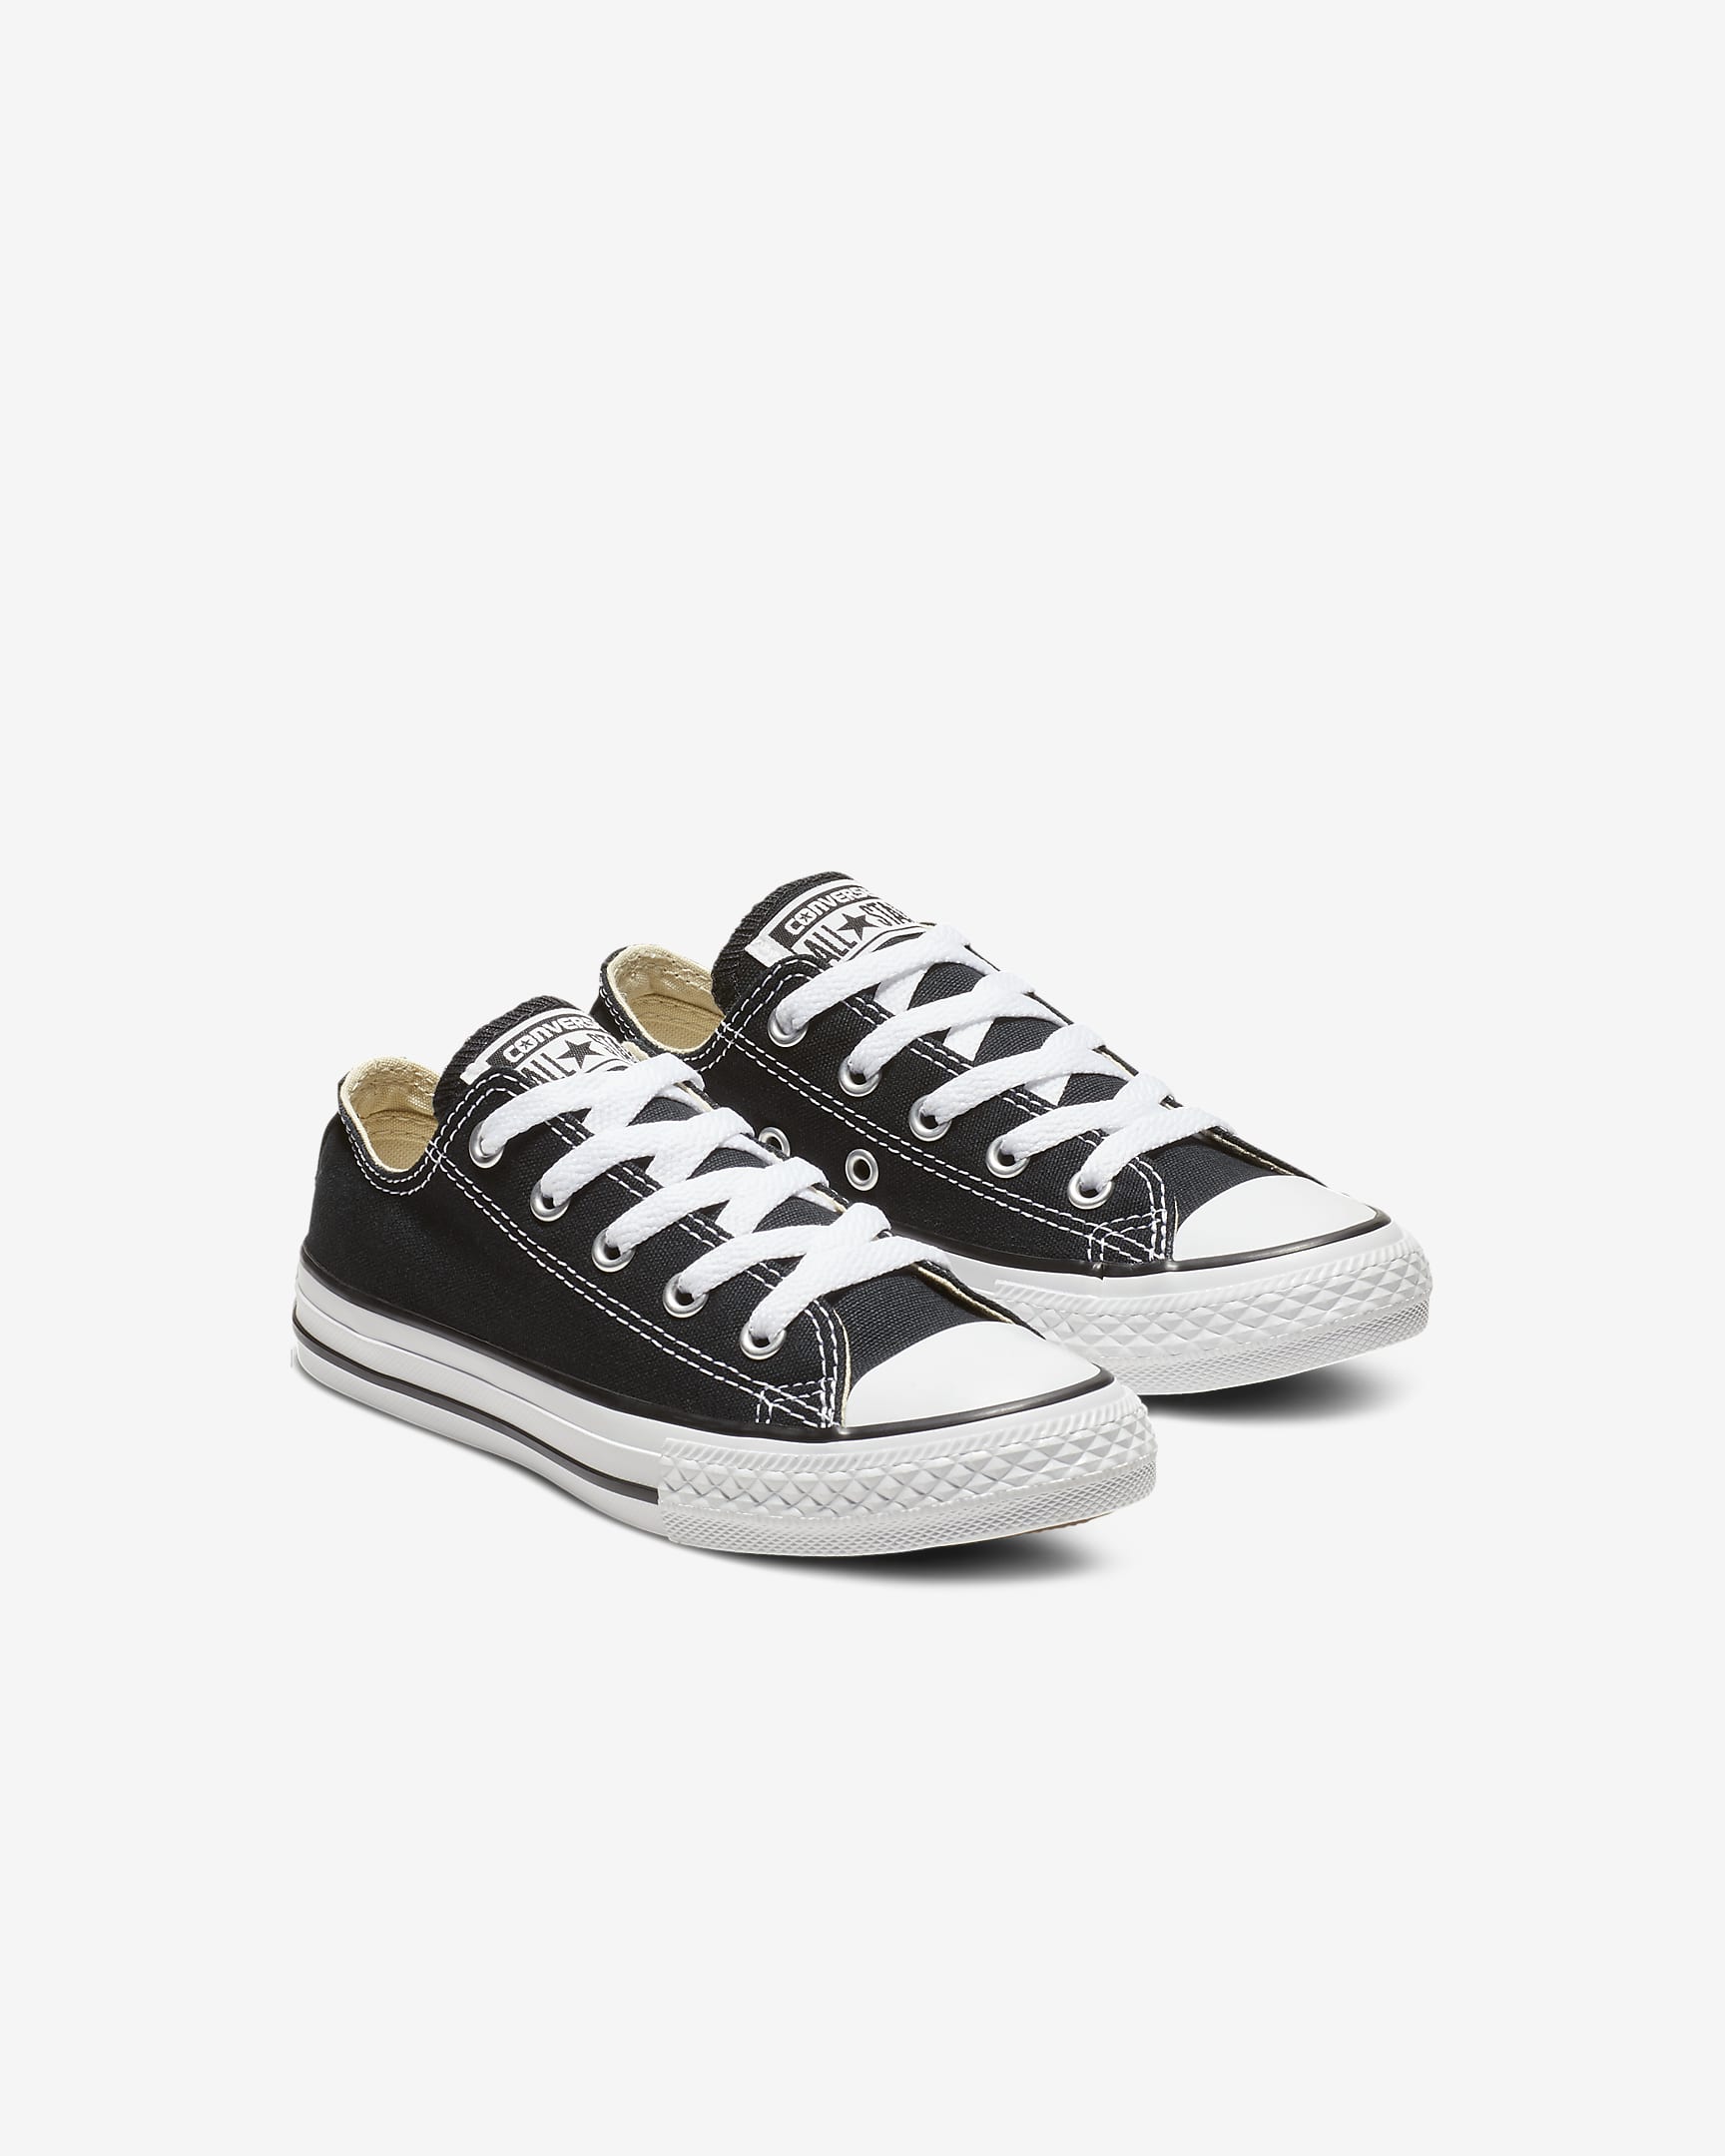 Converse Chuck Taylor All Star Low Top Little Kids' Shoes. Nike.com